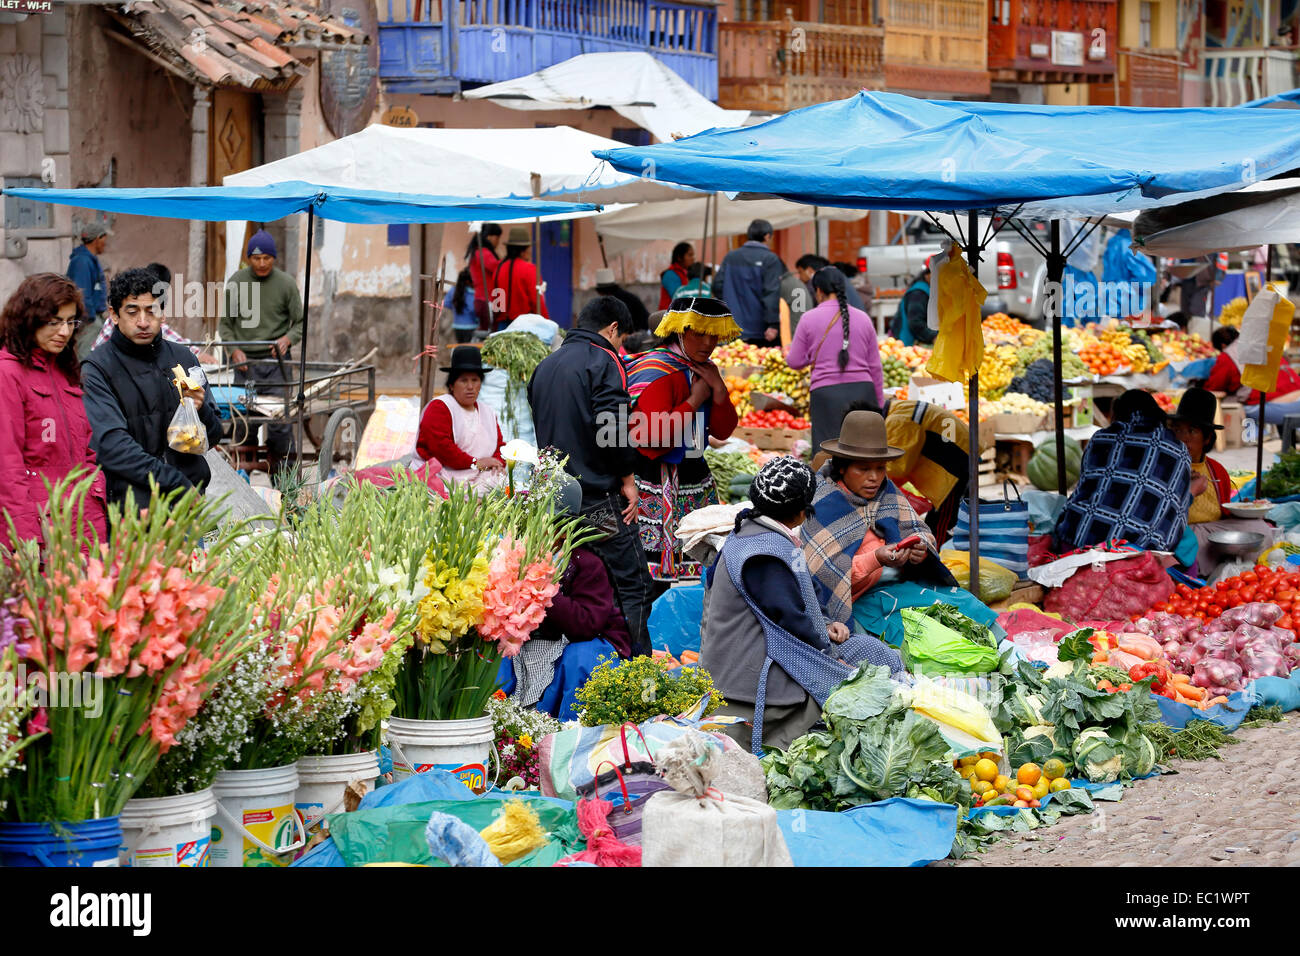 Quechua women vendors with produce and flowers for sale, Pisac Sunday Market, Cusco, Peru Stock Photo